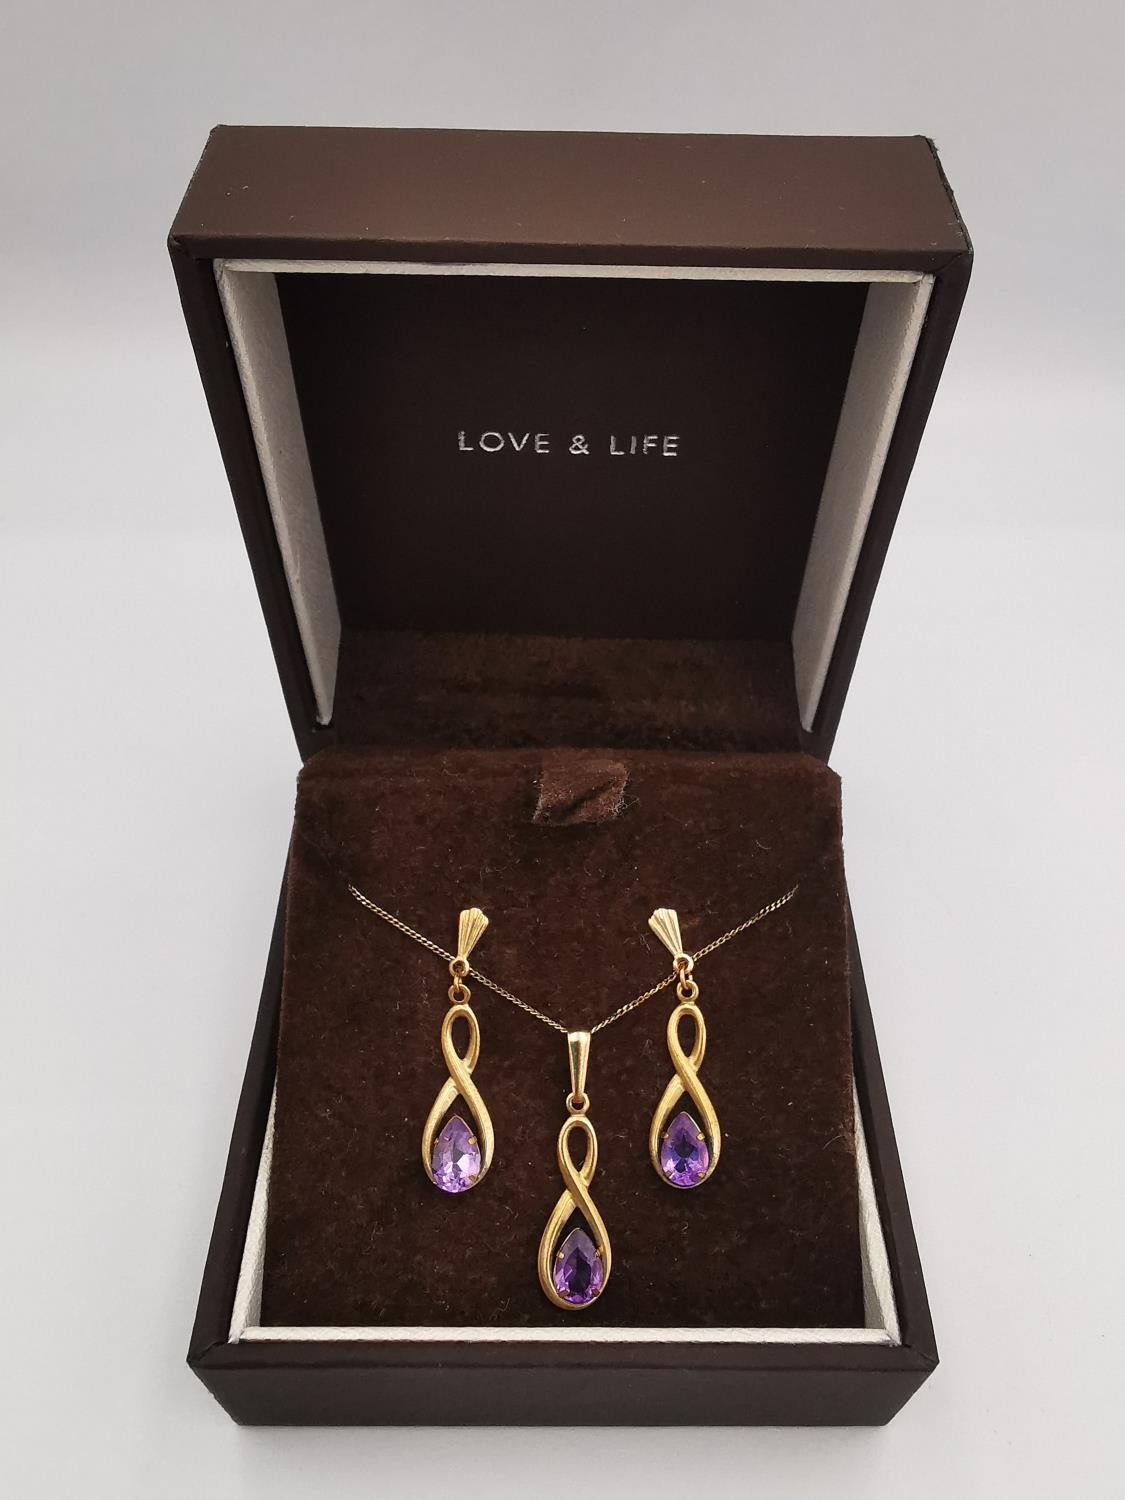 A 9ct rose gold and amethyst pendant with chain and earrings set. The infinity design pendant set